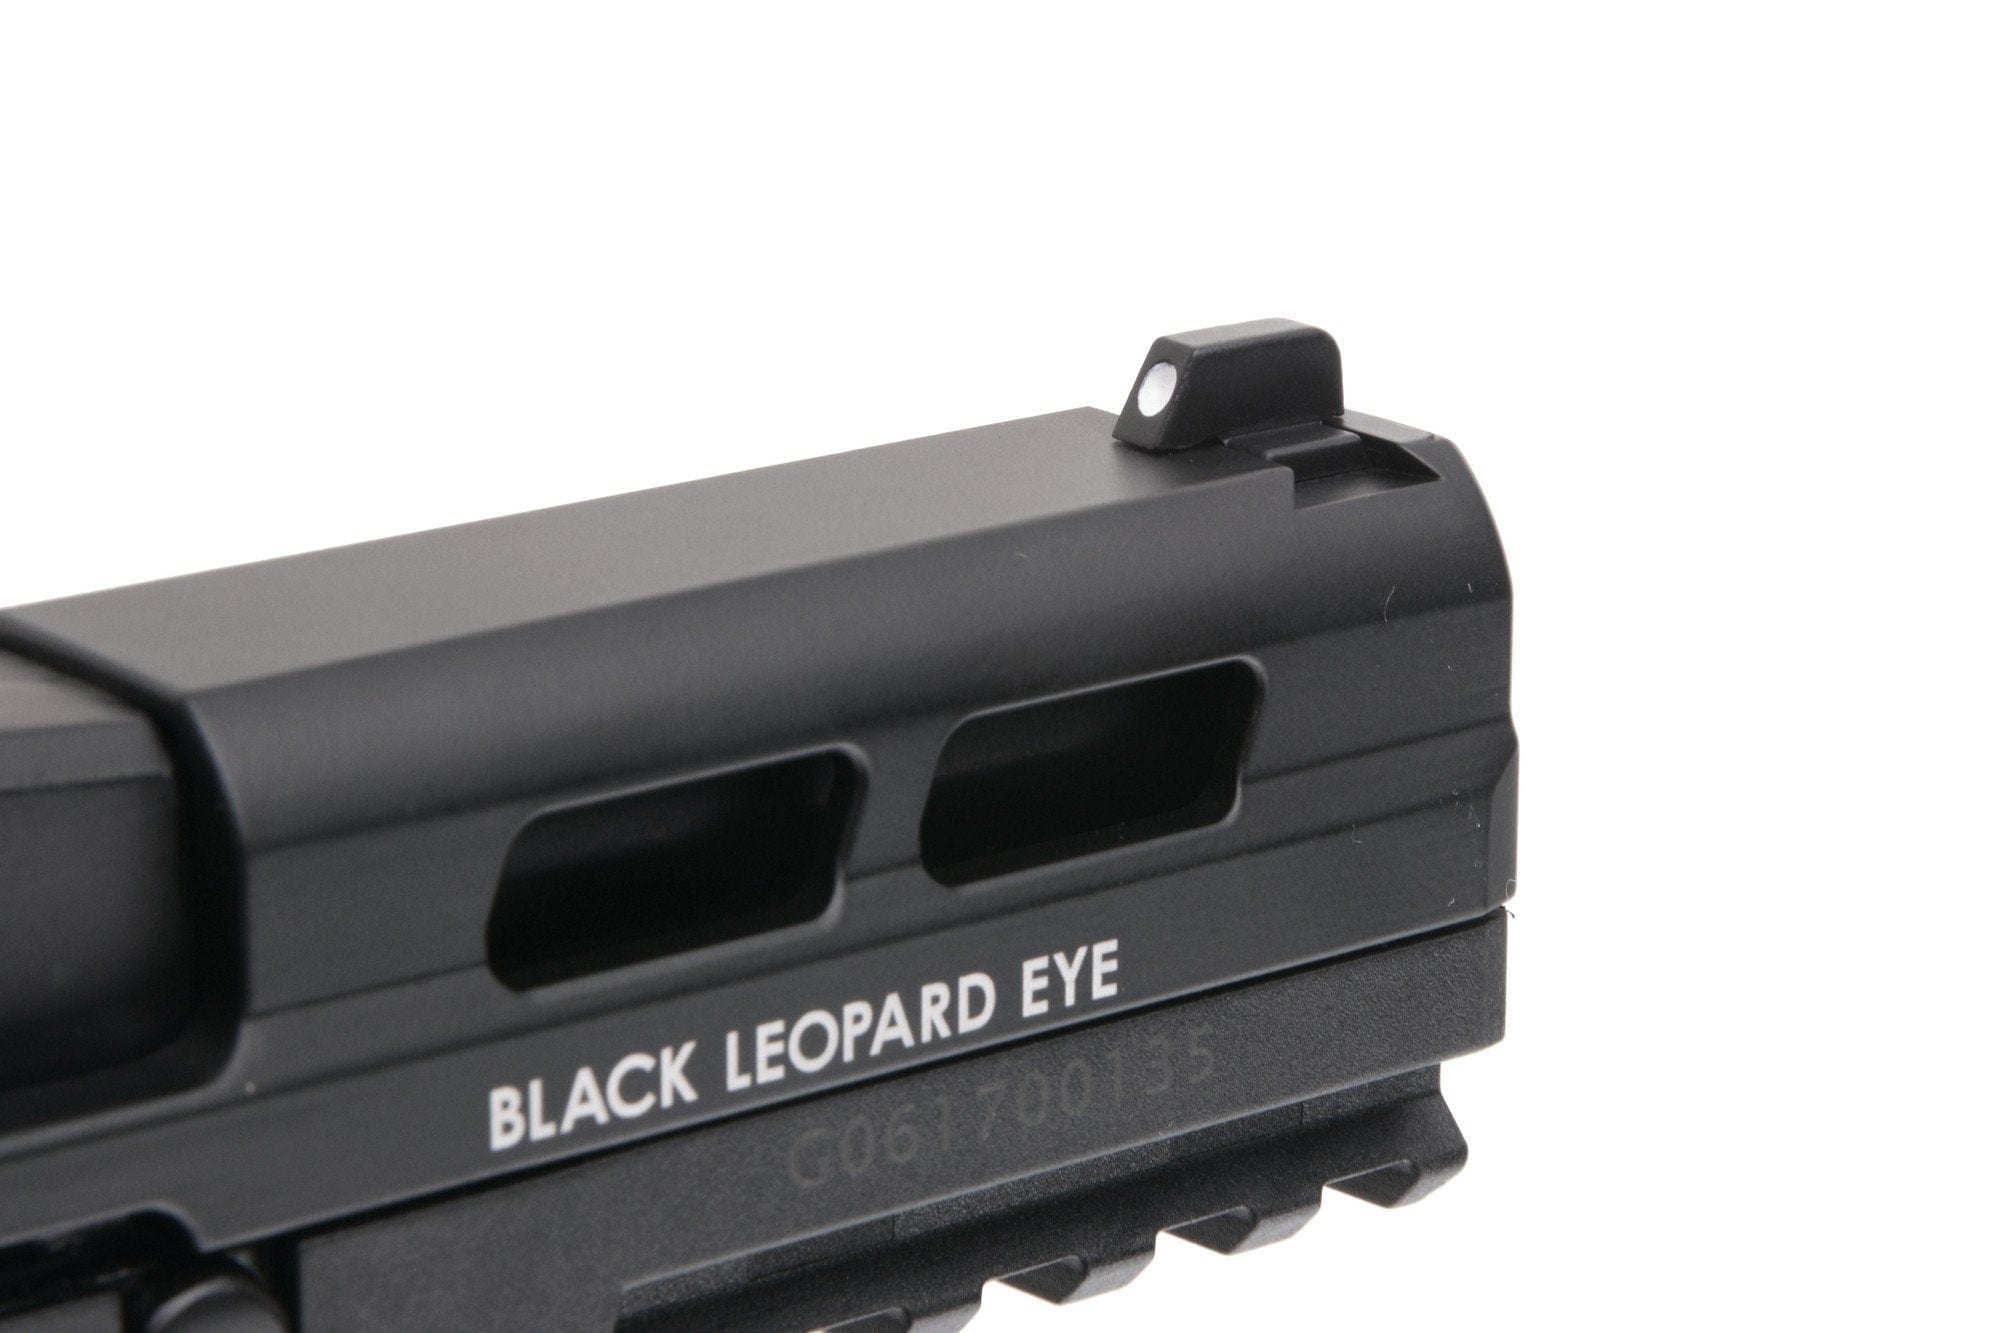 BLE XAE Pistol Replica - Black by ICS on Airsoft Mania Europe